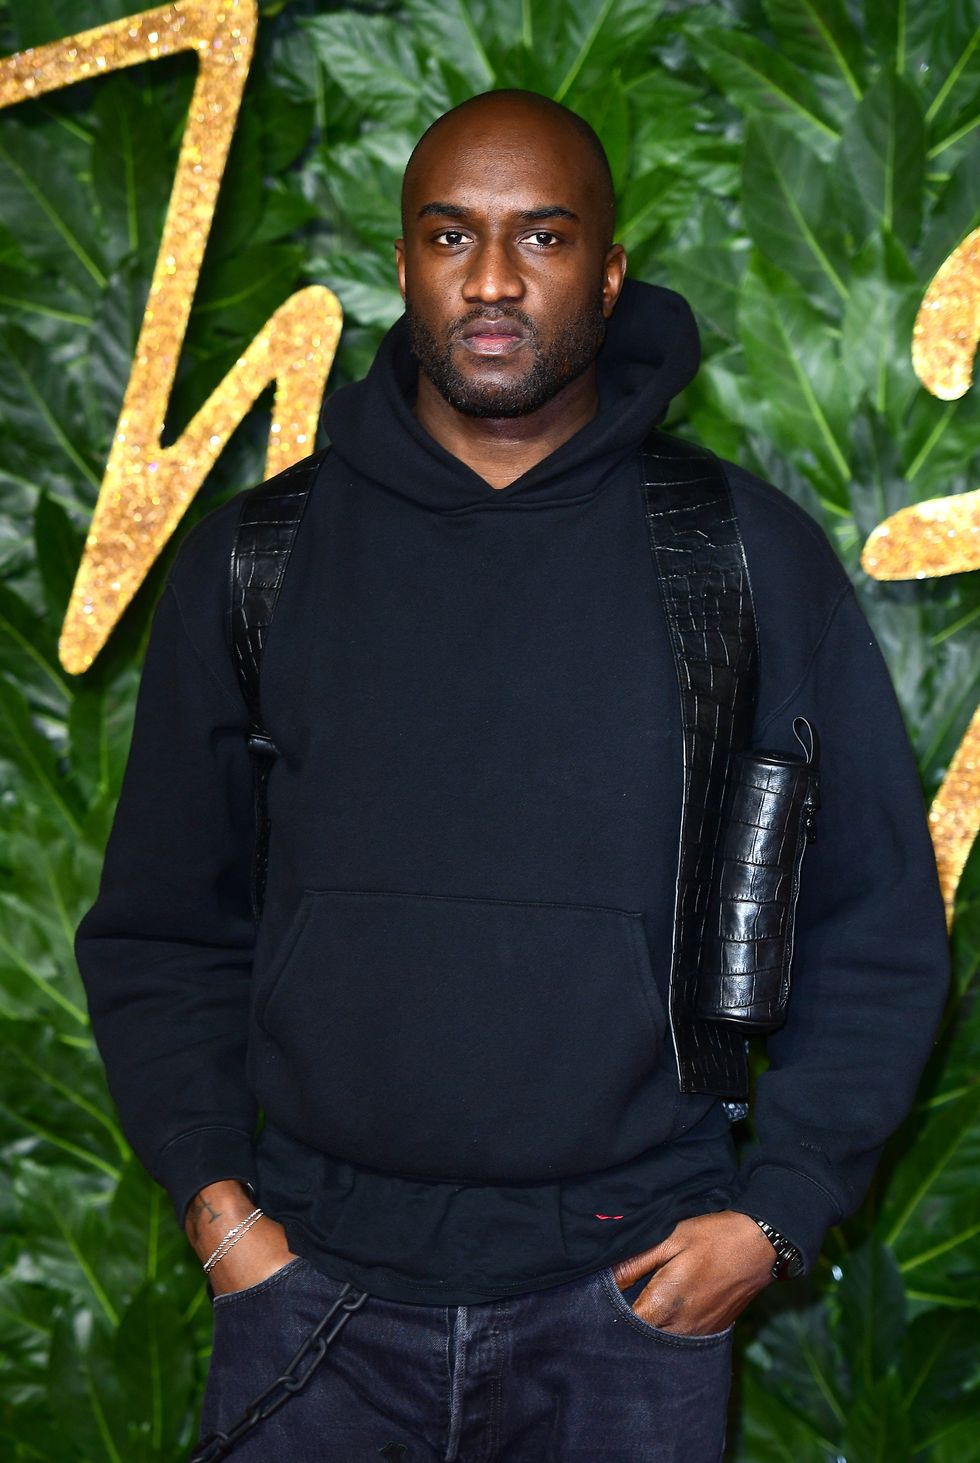 Trainers designed by Virgil Abloh raise record-breaking £18.7 million at auction